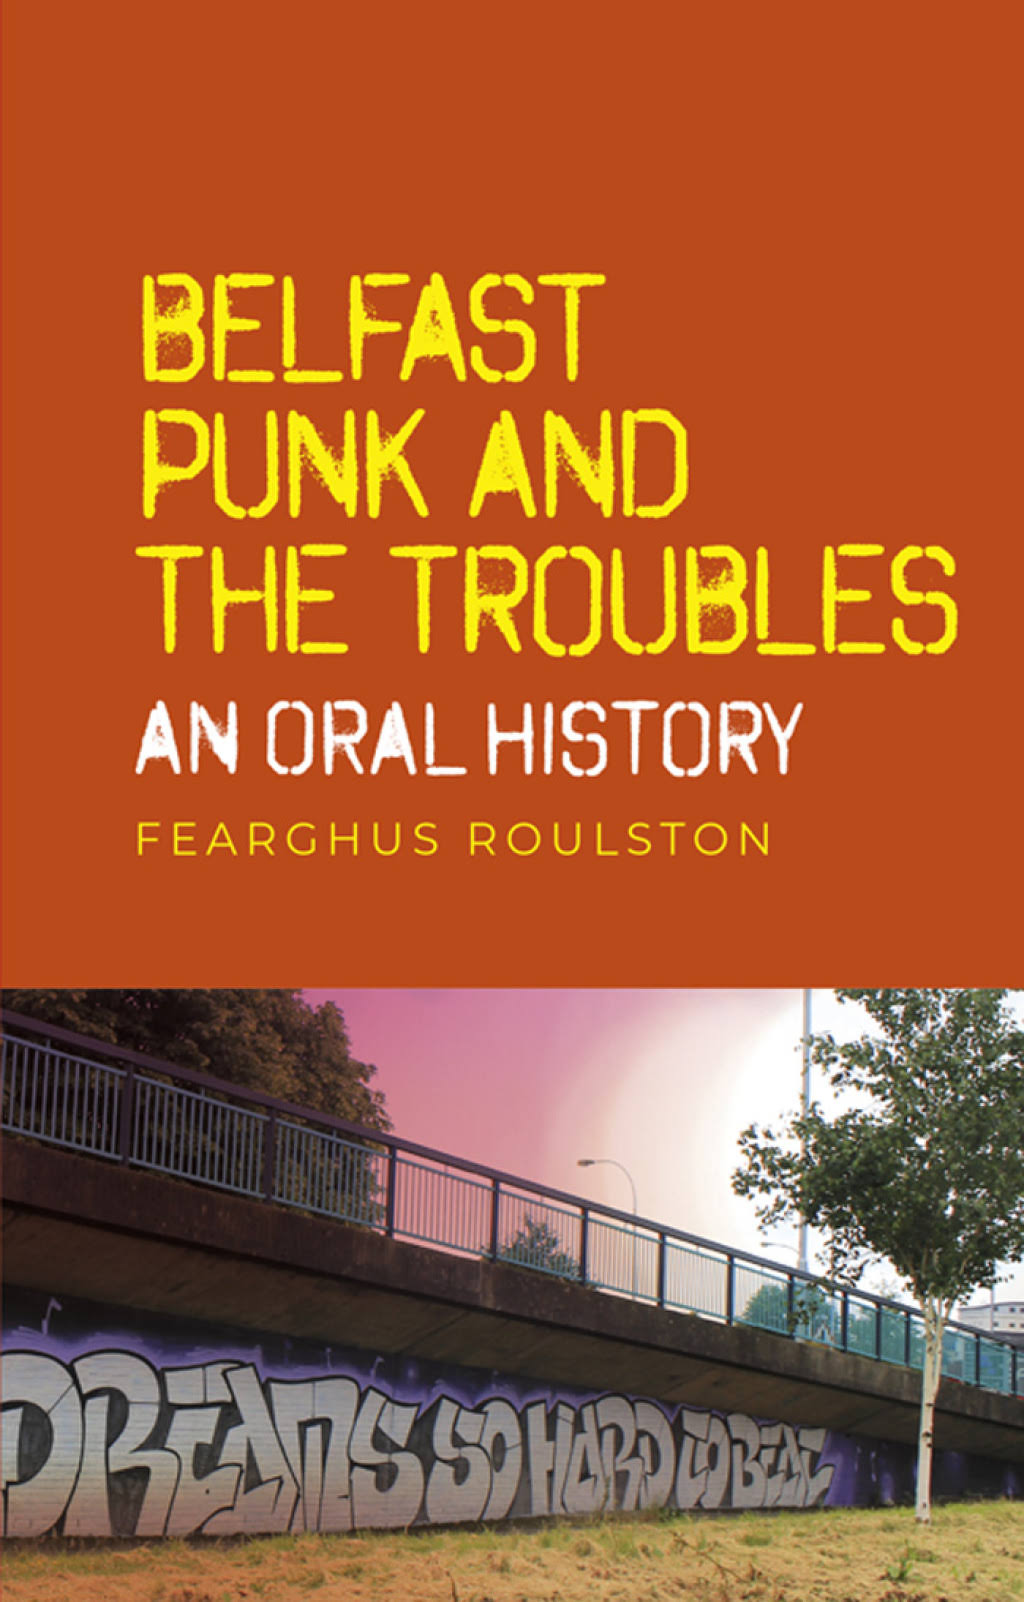 Belfast Punk and the Troubles: an Oral History [Book]